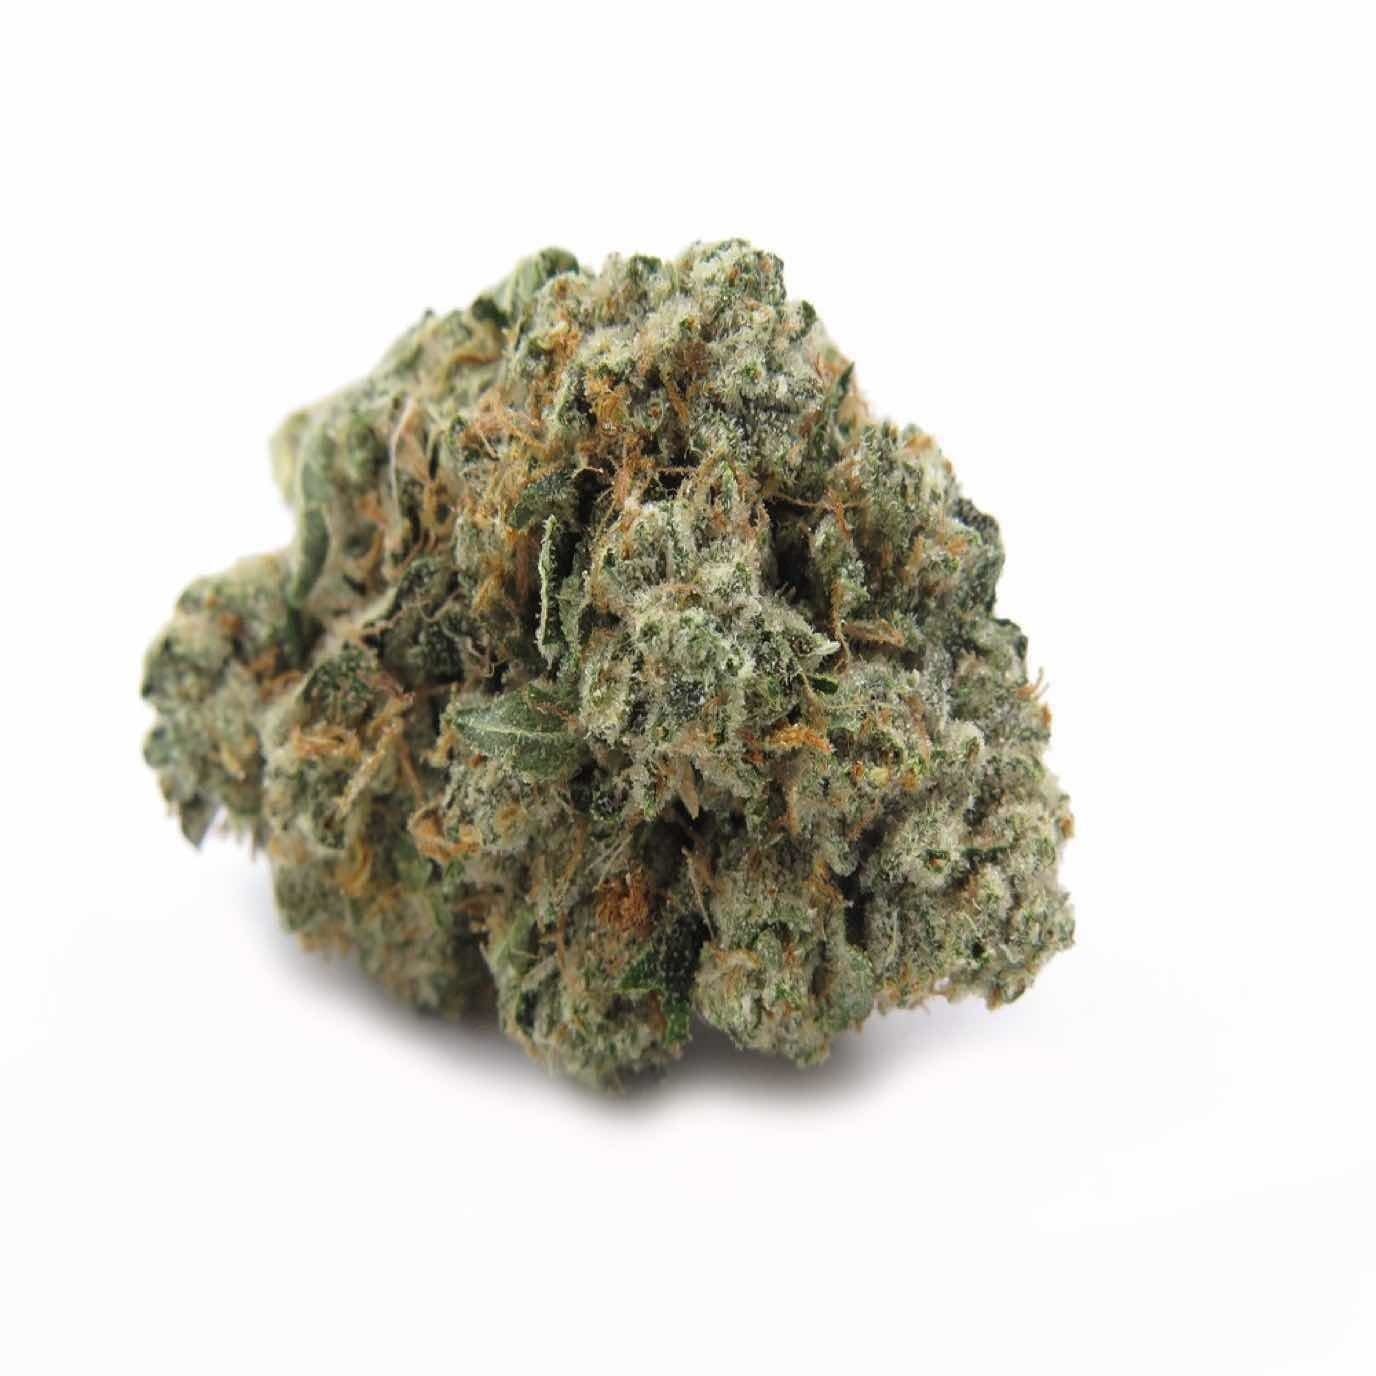 Federal Reserve Kush Donate one 1/8, get one 1/8 FREE